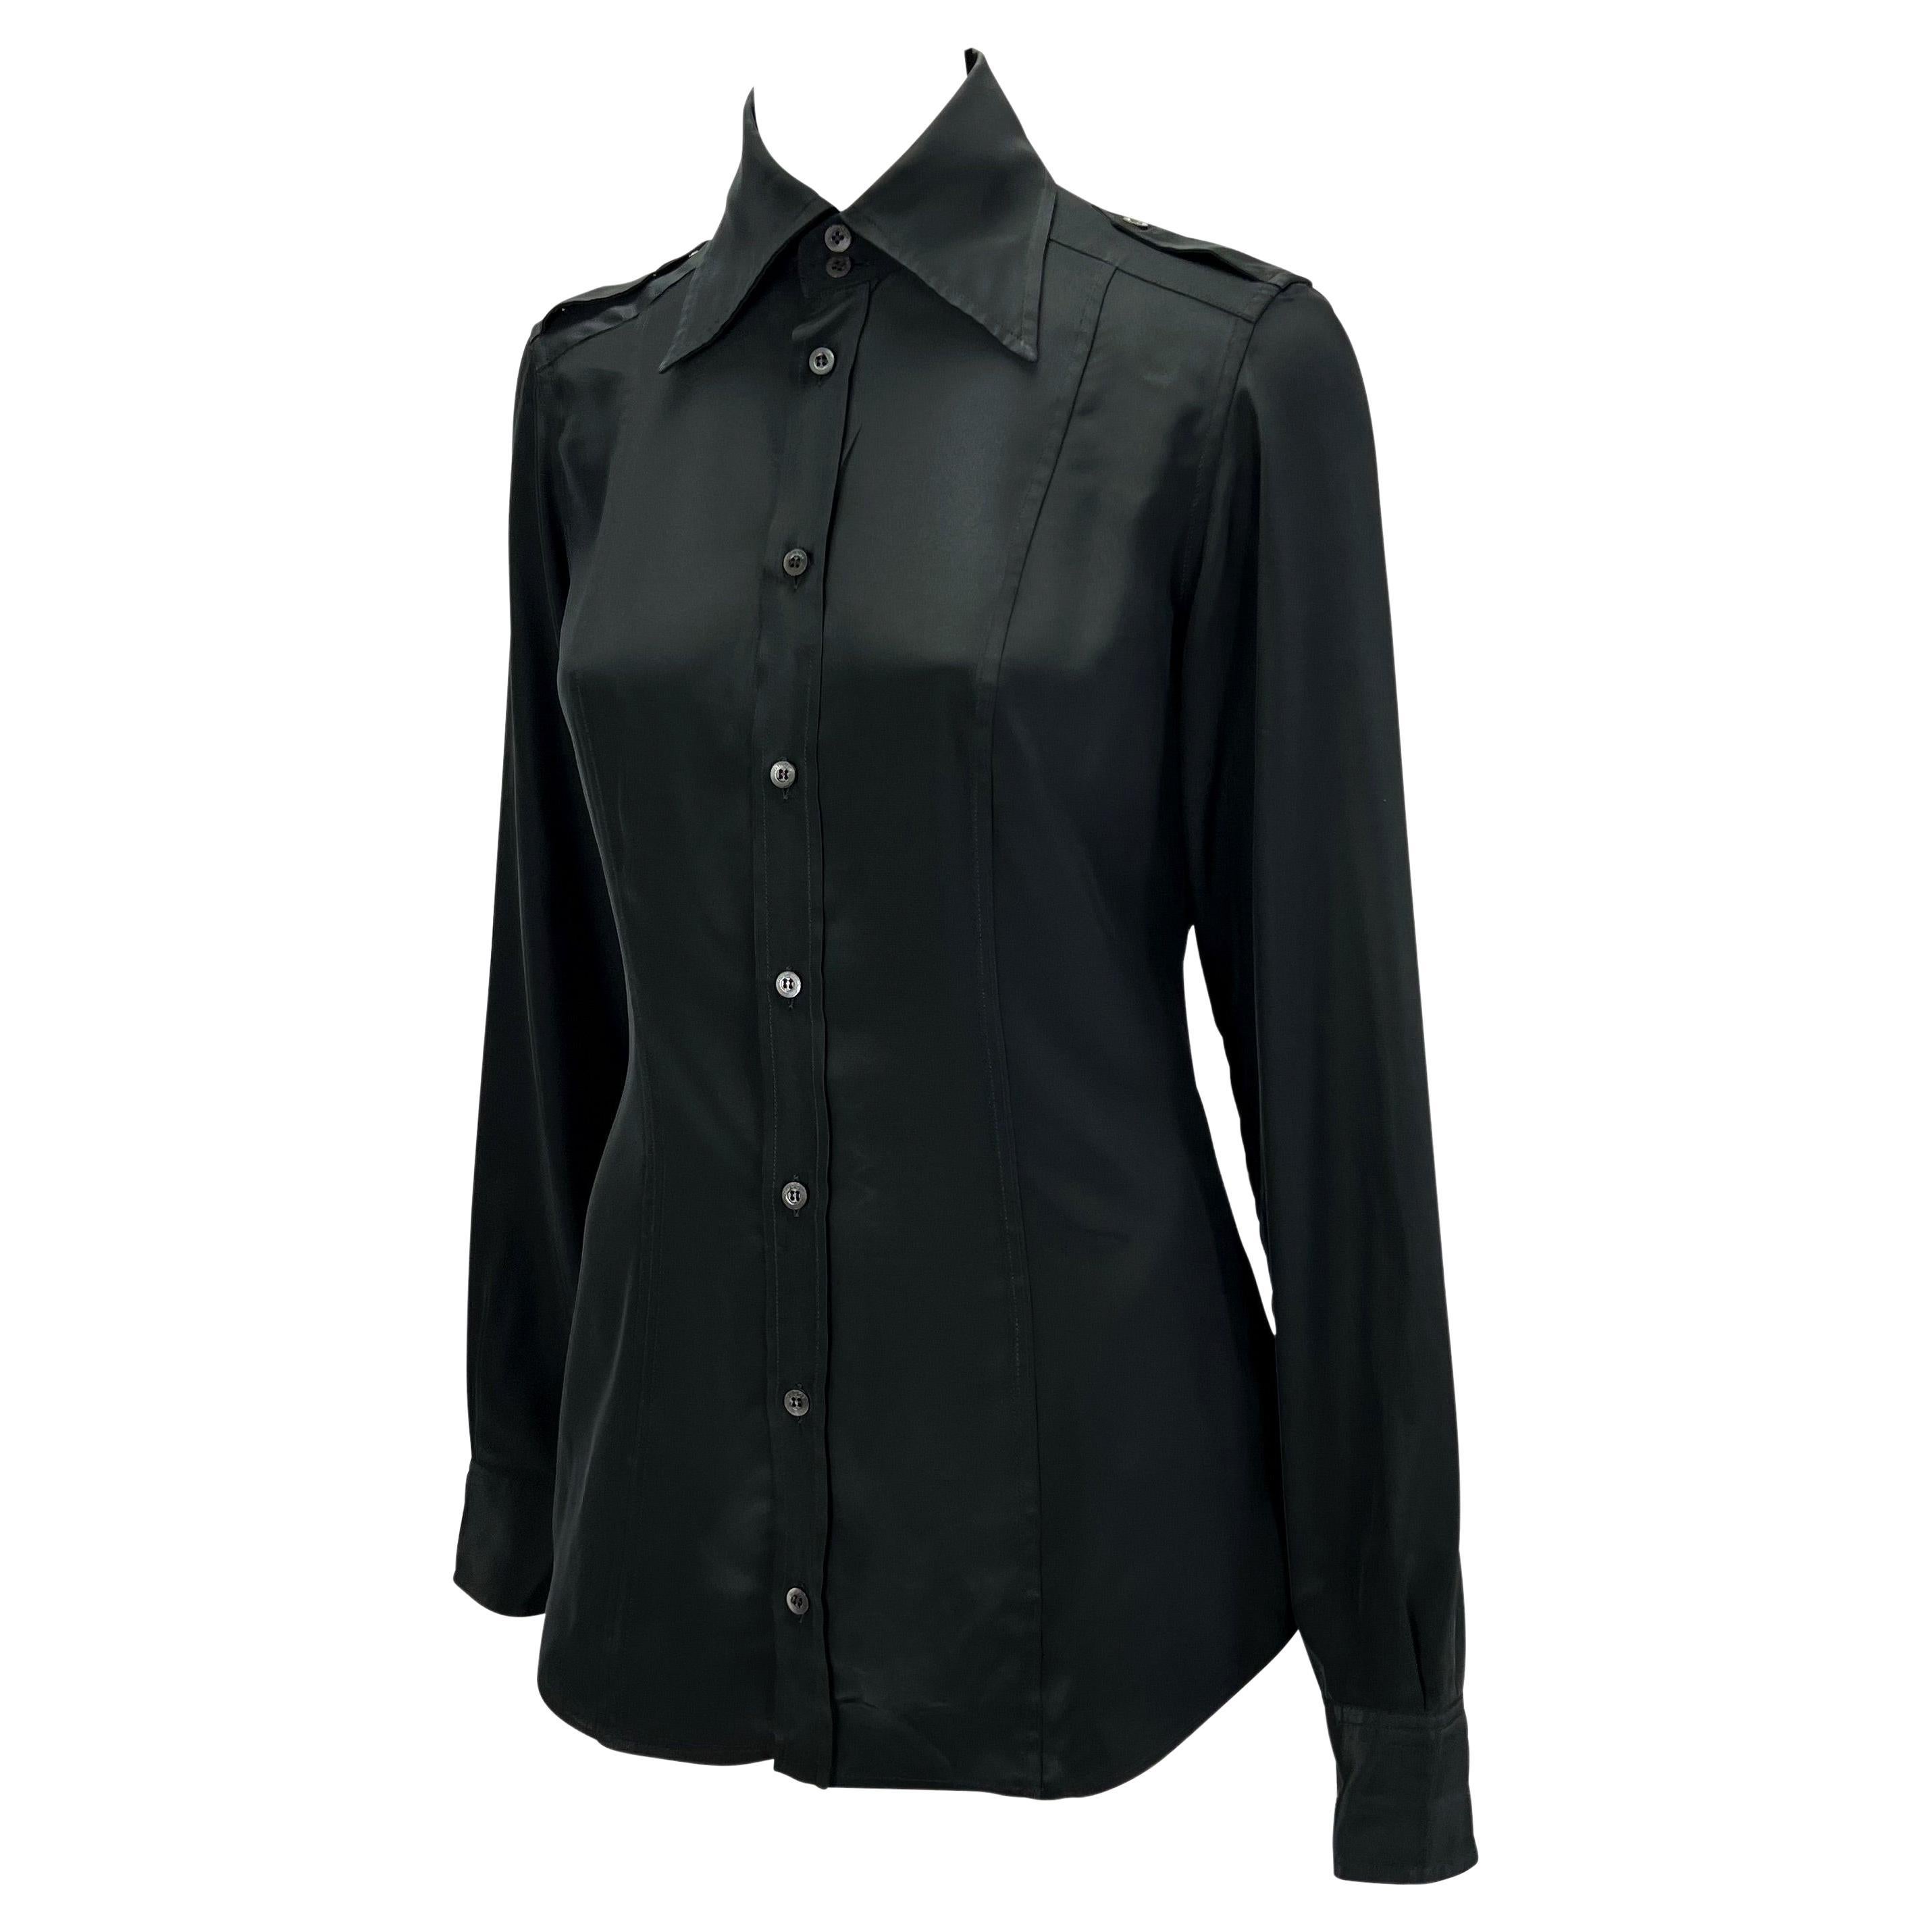 Presenting a black collared button-up Gucci top, designed by Tom Ford. Constructed of panels of lightweight polyester, this top has long sleeves, a prominent collar, and epaulets. Not your average top, this shirt was designed for the Spring/Summer